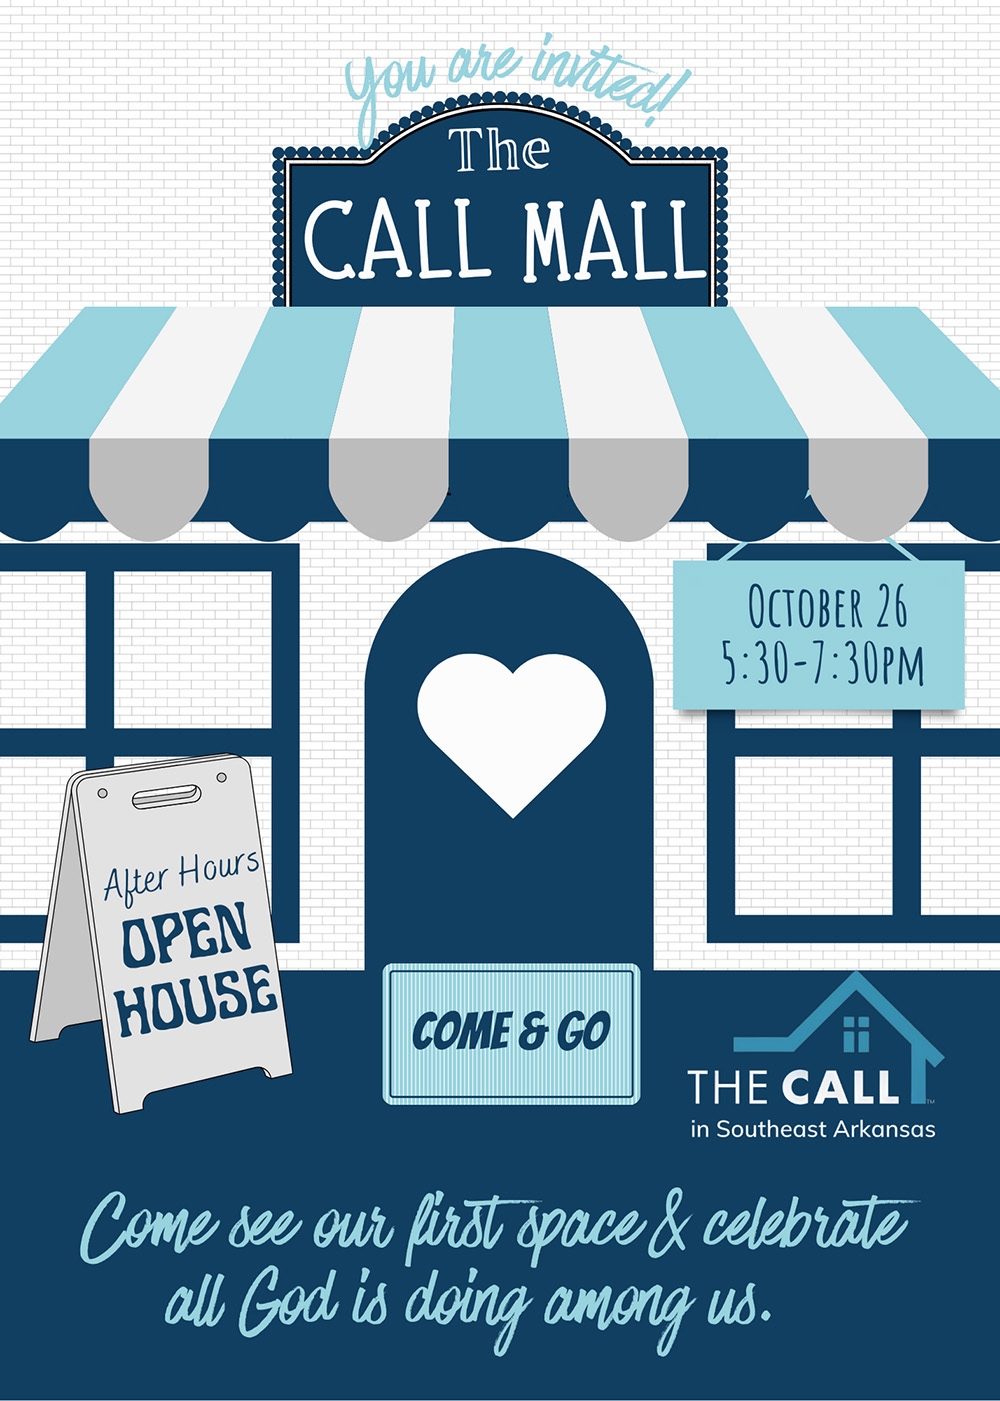 CALL Mall & Center to host grand opening October 26